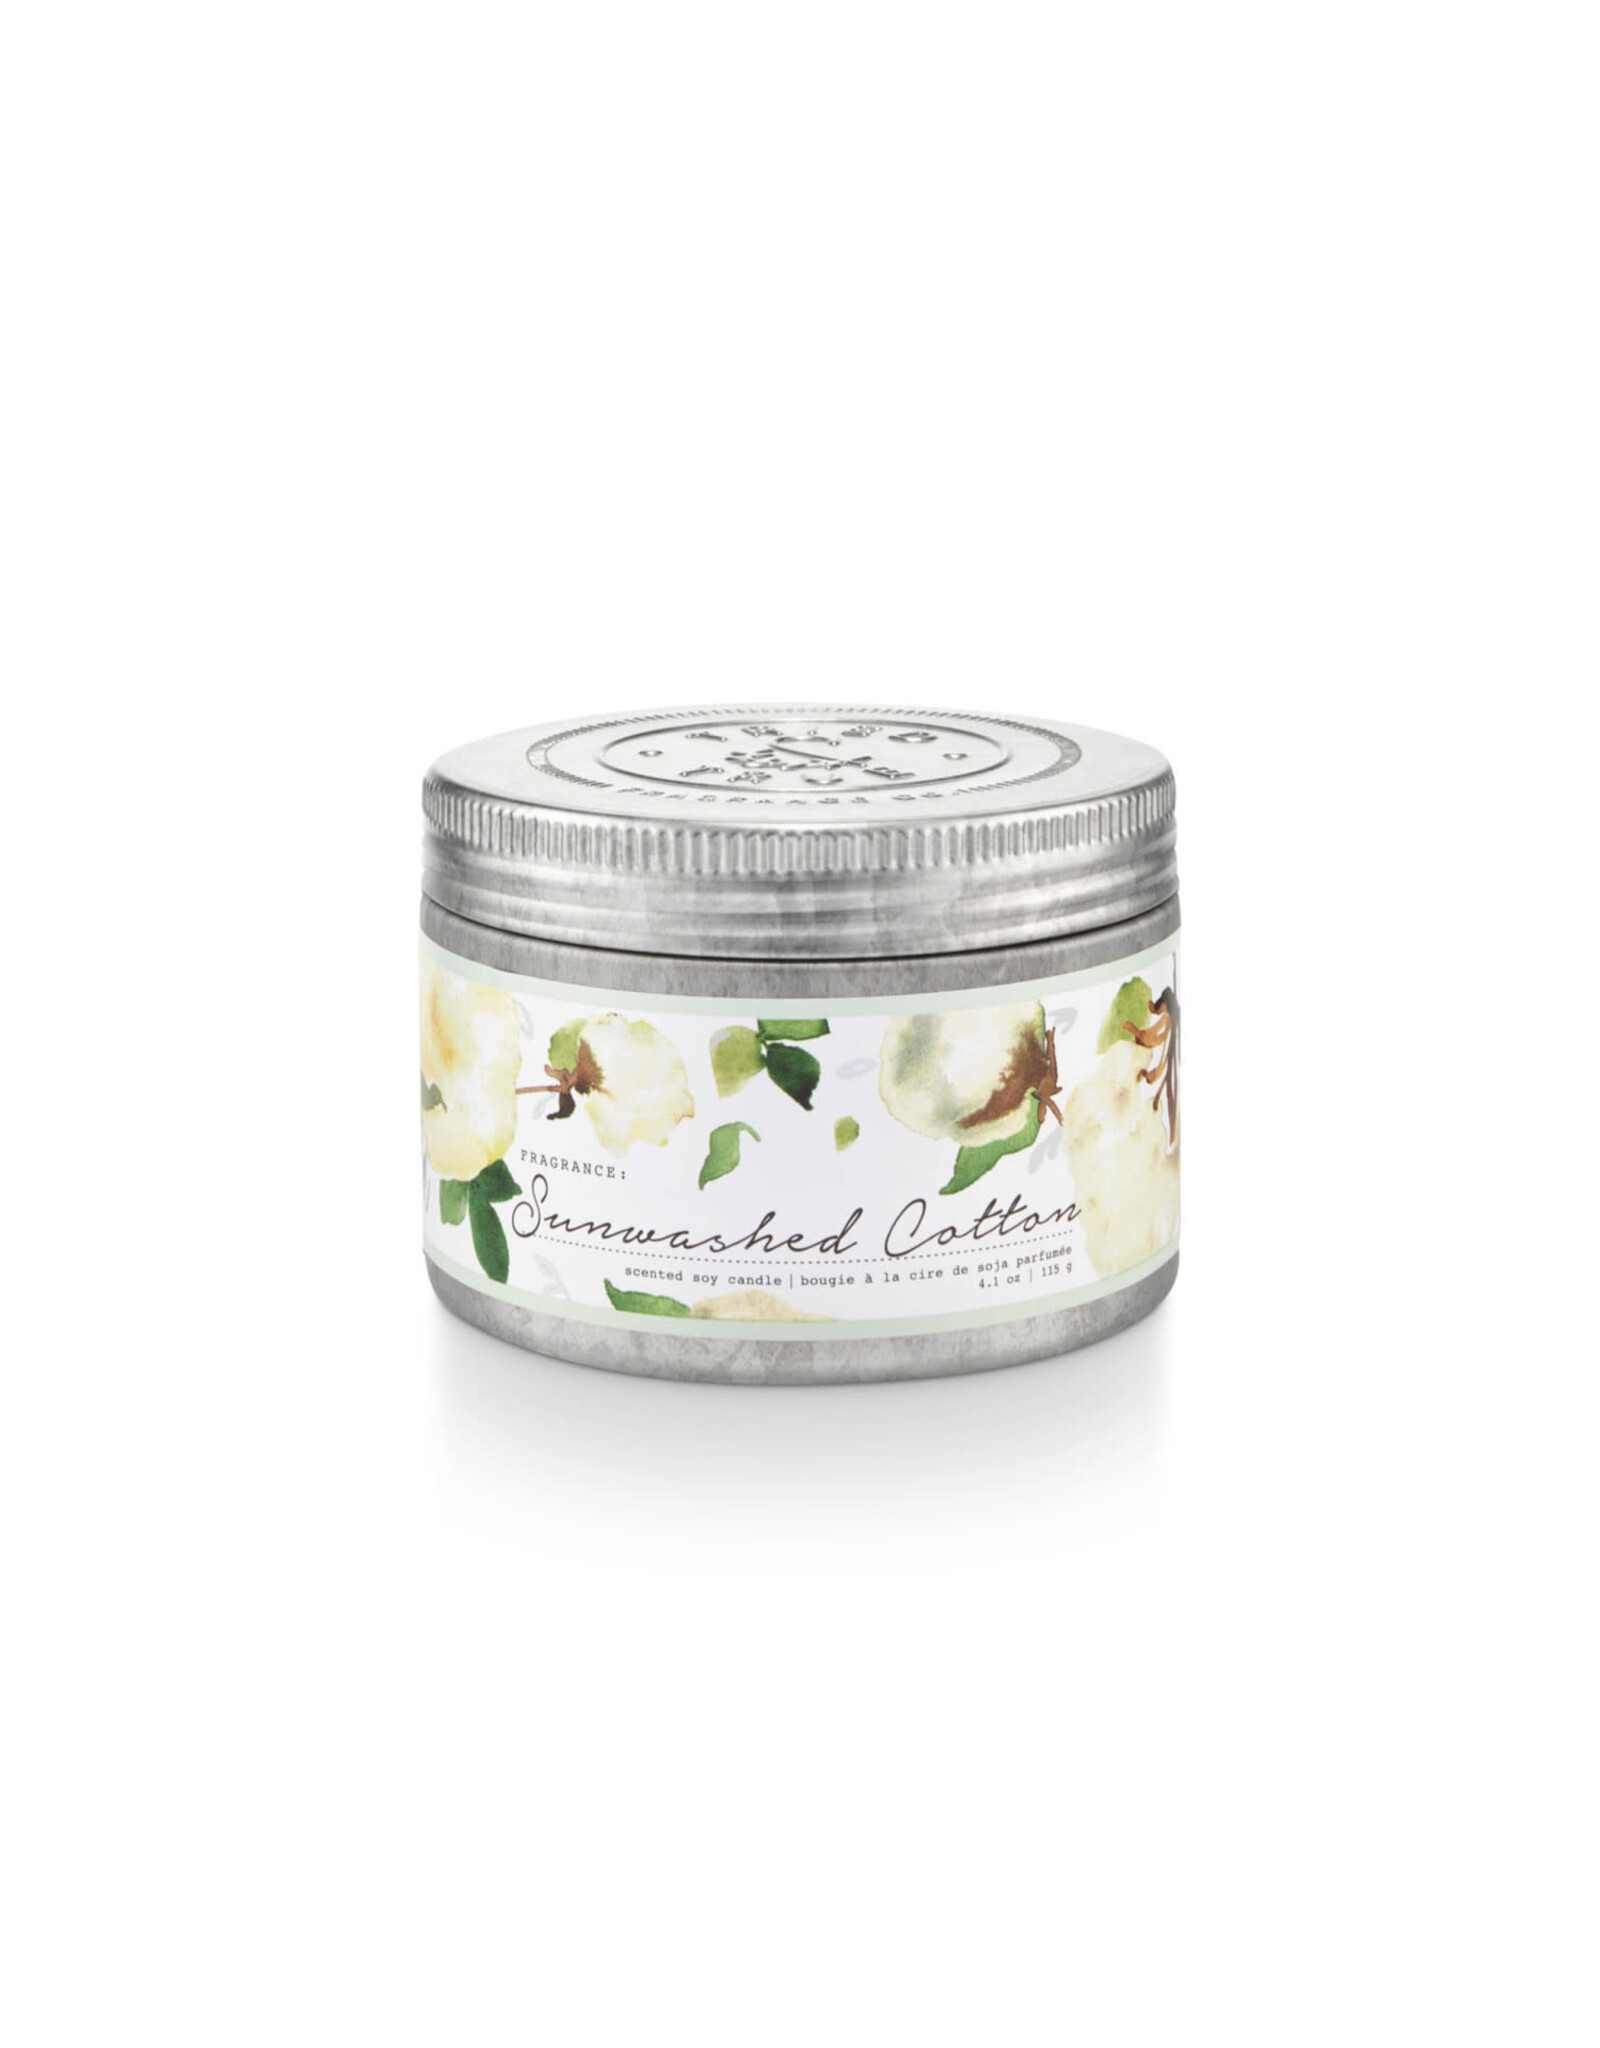 Tried & True Sunwashed Cotton Small Tin Candle 18456009000